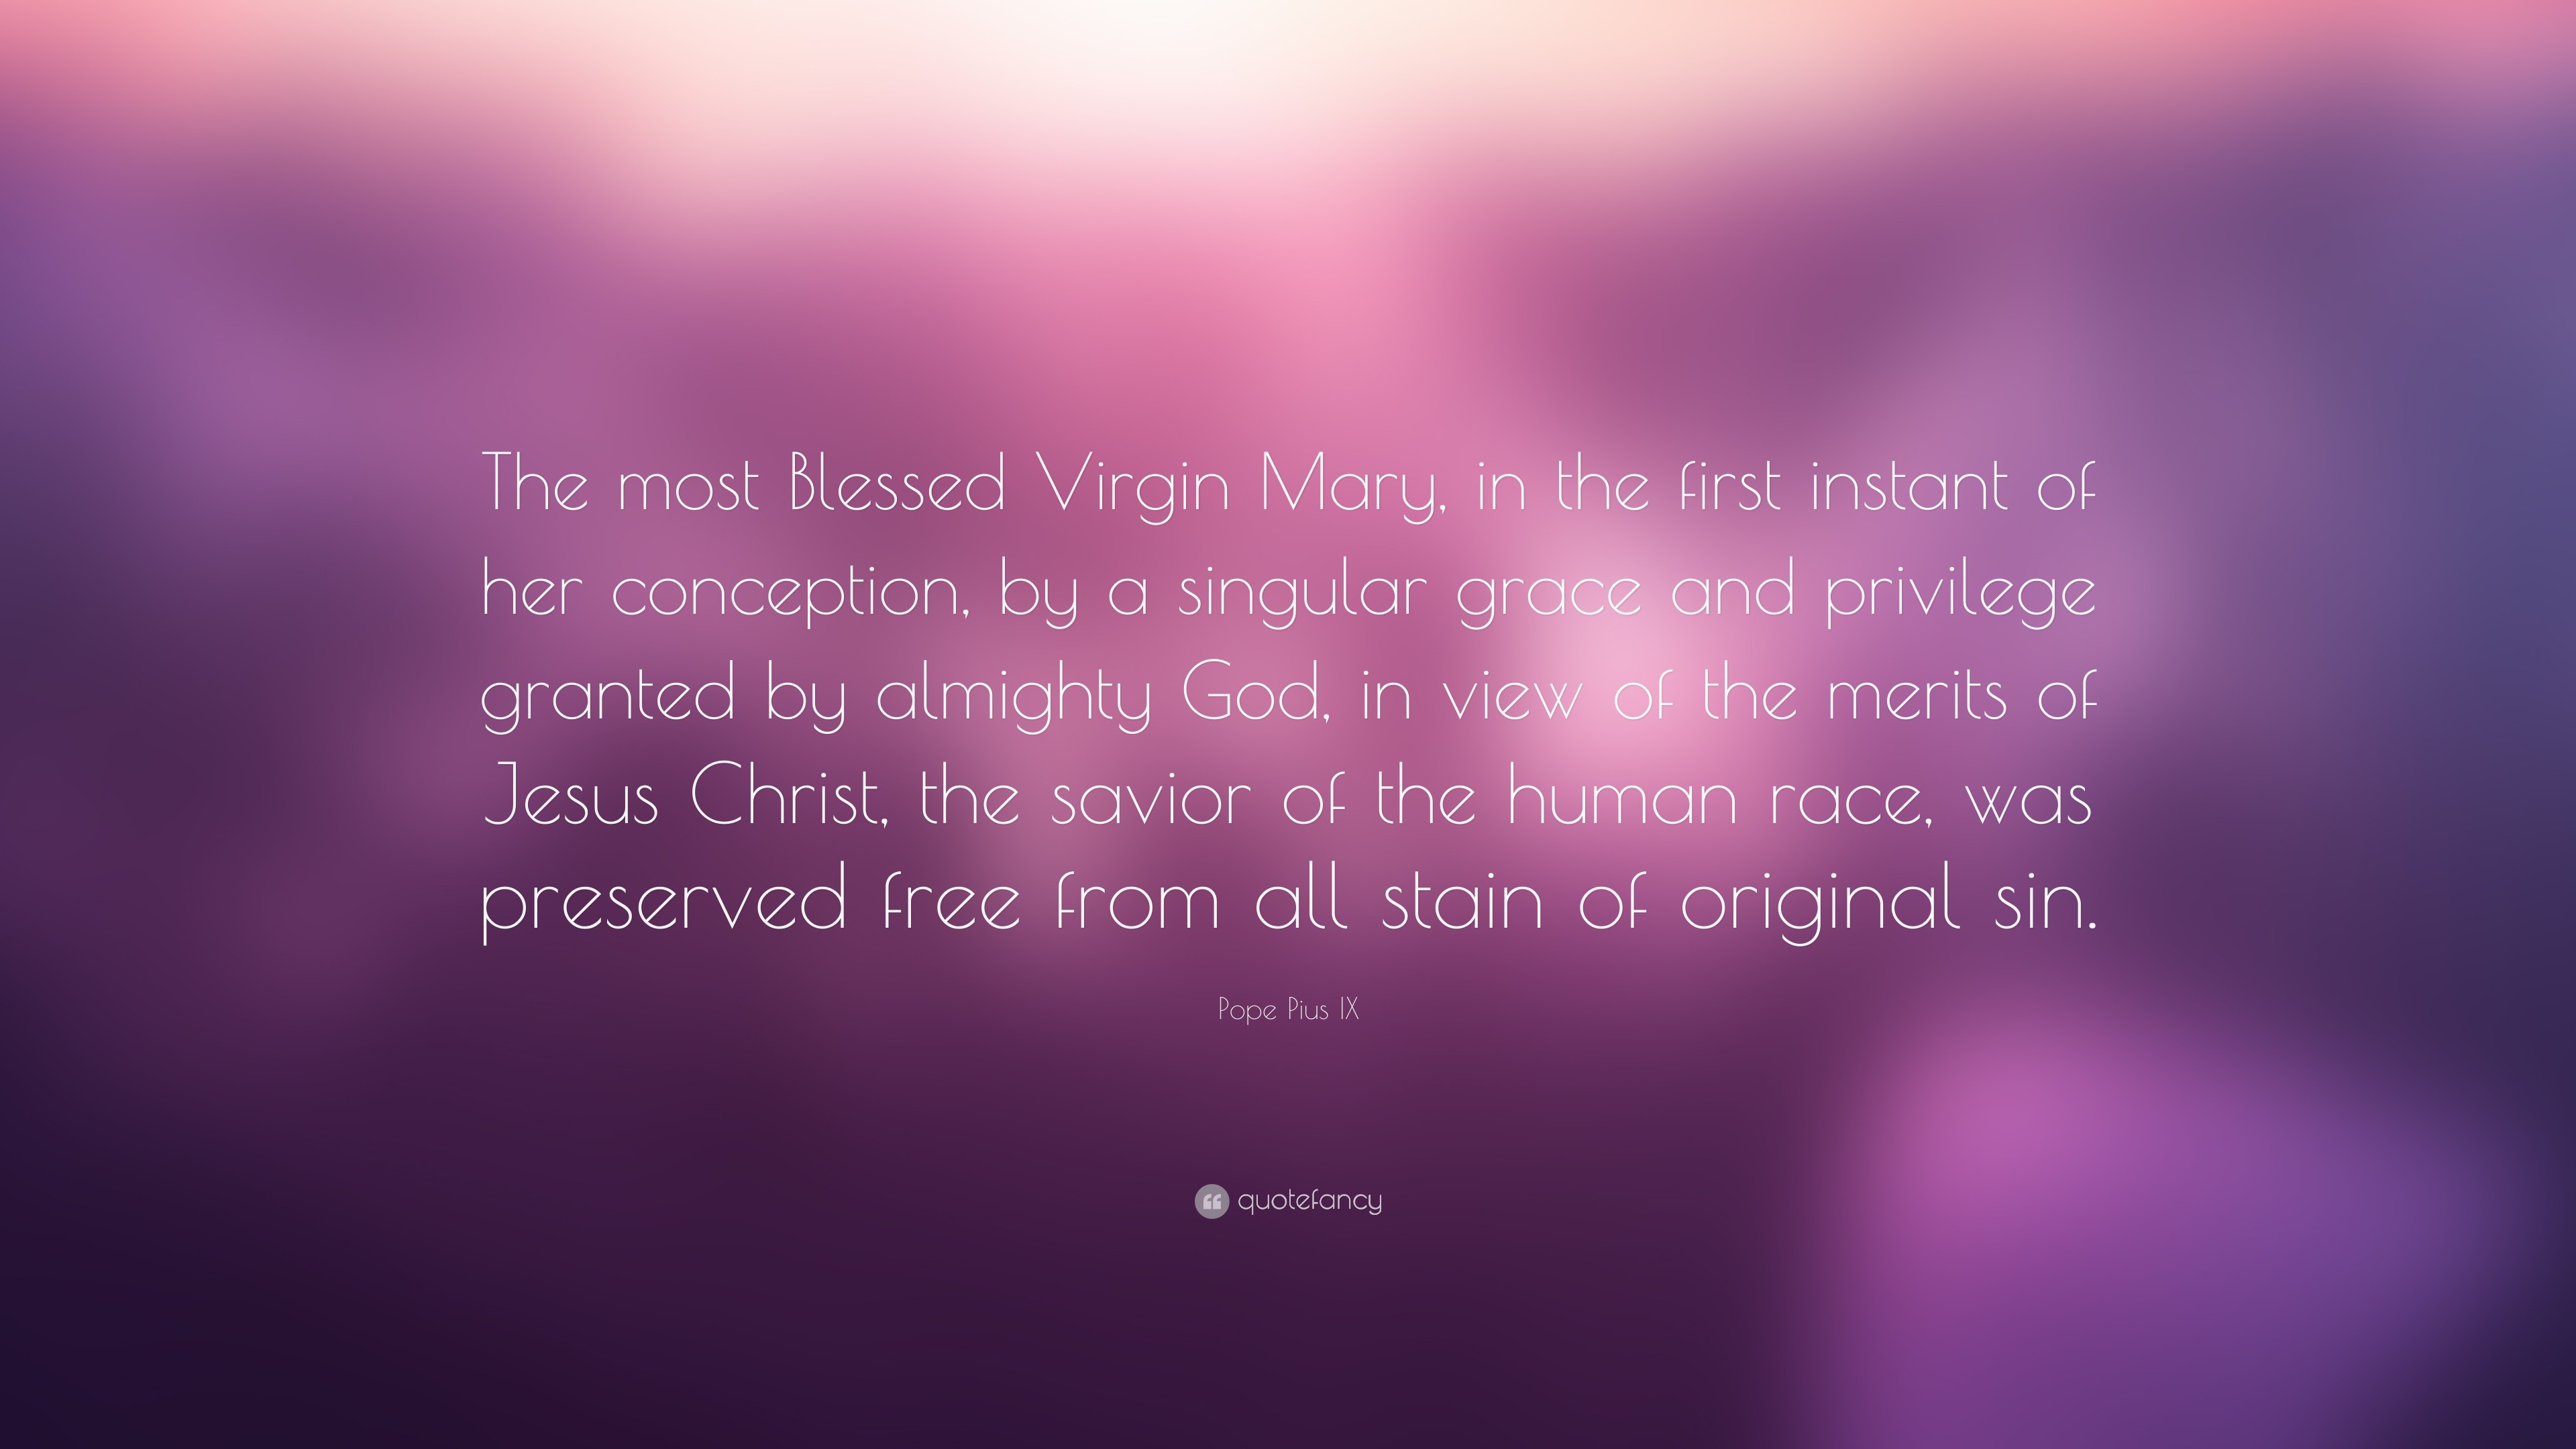 3840x2160 Pope Pius IX Quote: “The most Blessed Virgin Mary, in the first instant